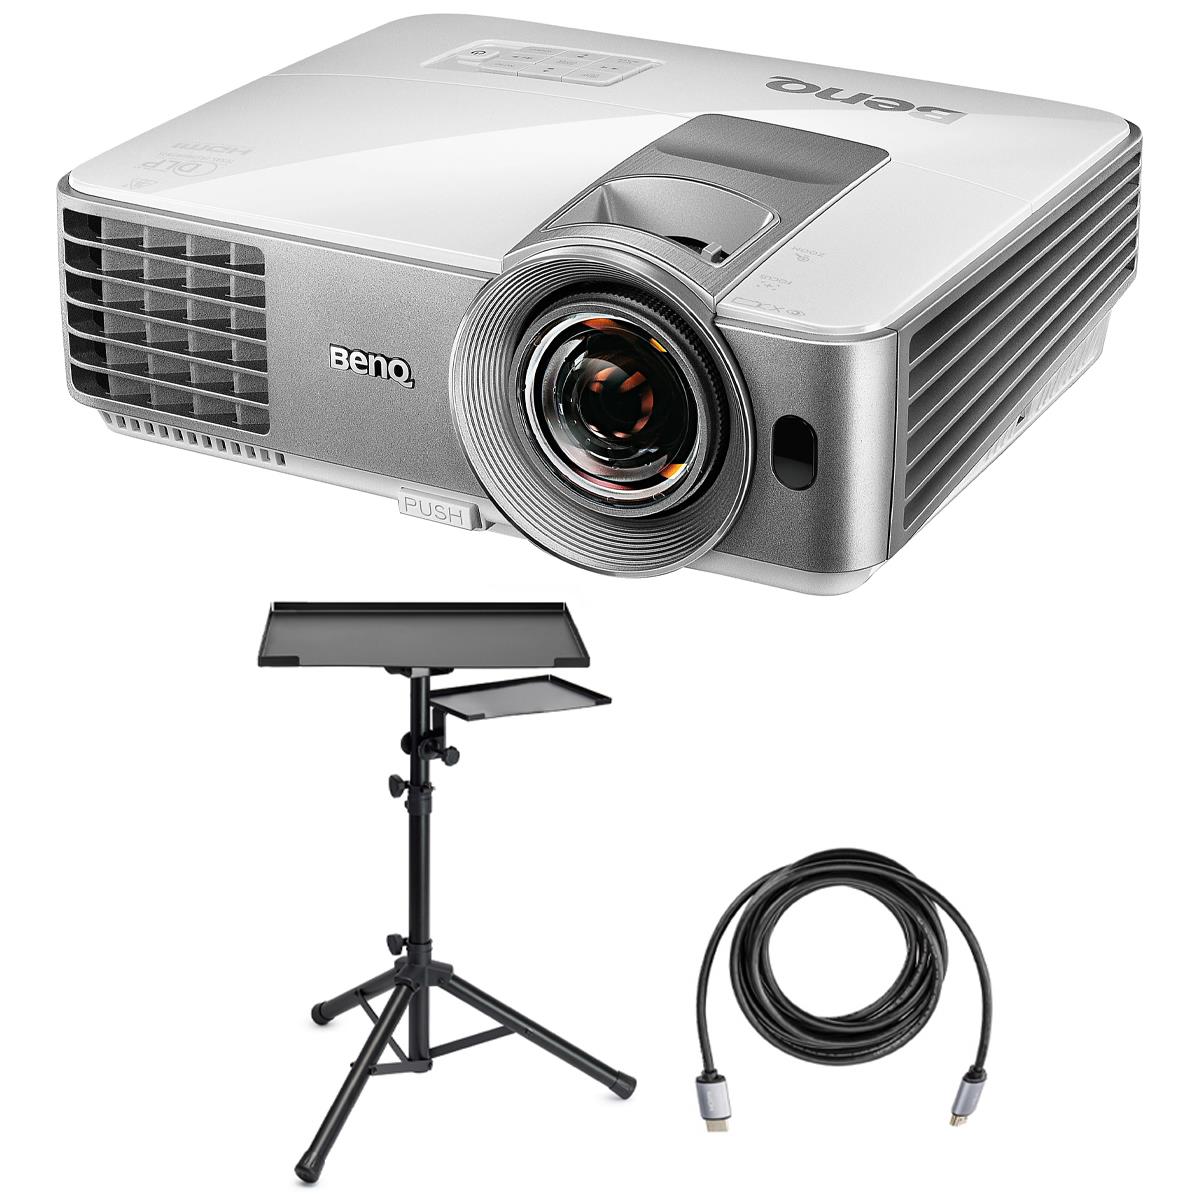 Image of BenQ TH575 Full HD DLP Home Theater Gaming Projector with Stand